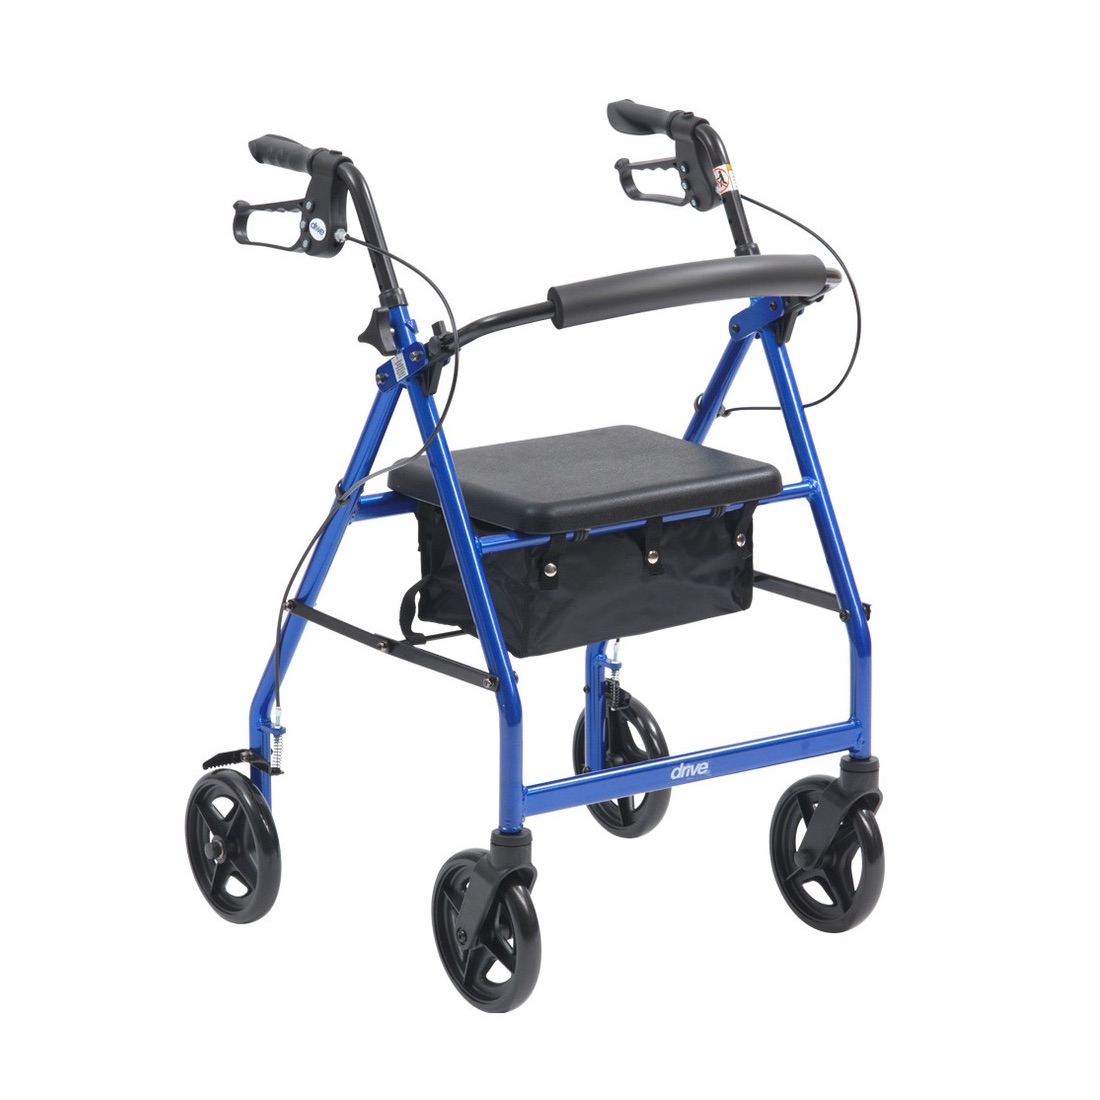 R6 Rollator by Drive Medical. Lightweight, Aluminium. On Promotional Offer, while stocks last.